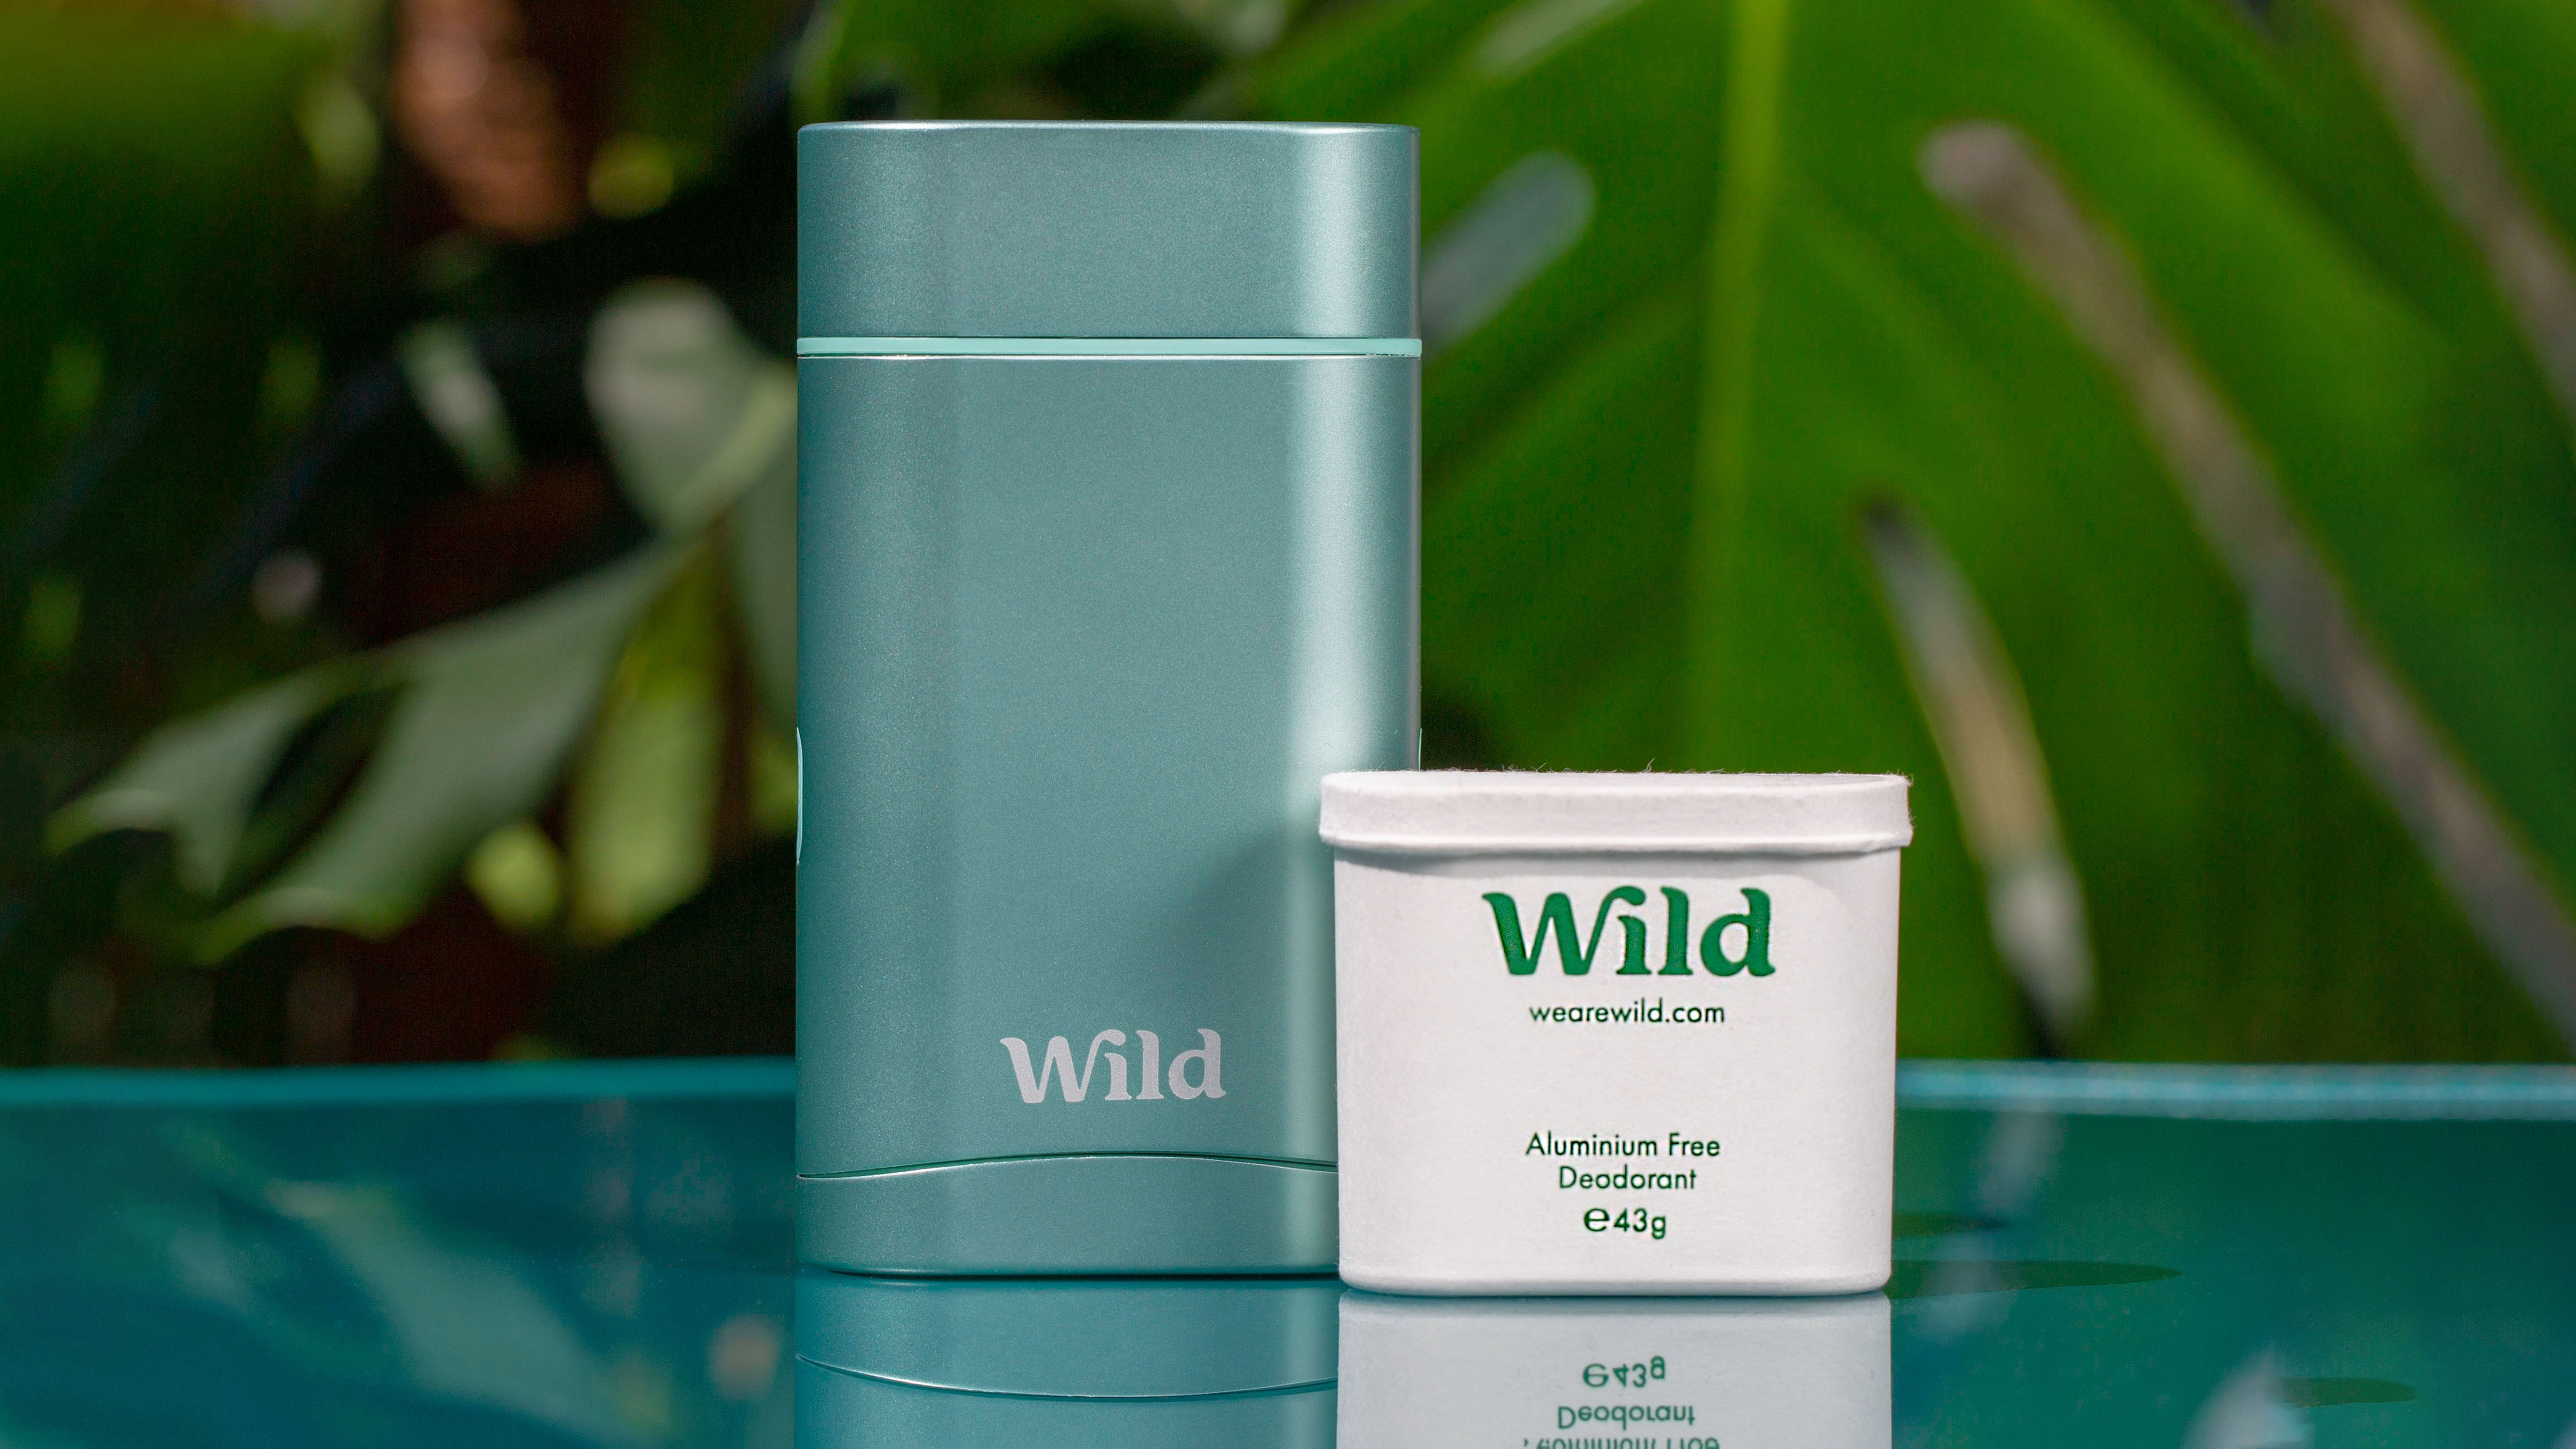 Wild deodorant review: Does Wild deodorant work, and is it worth